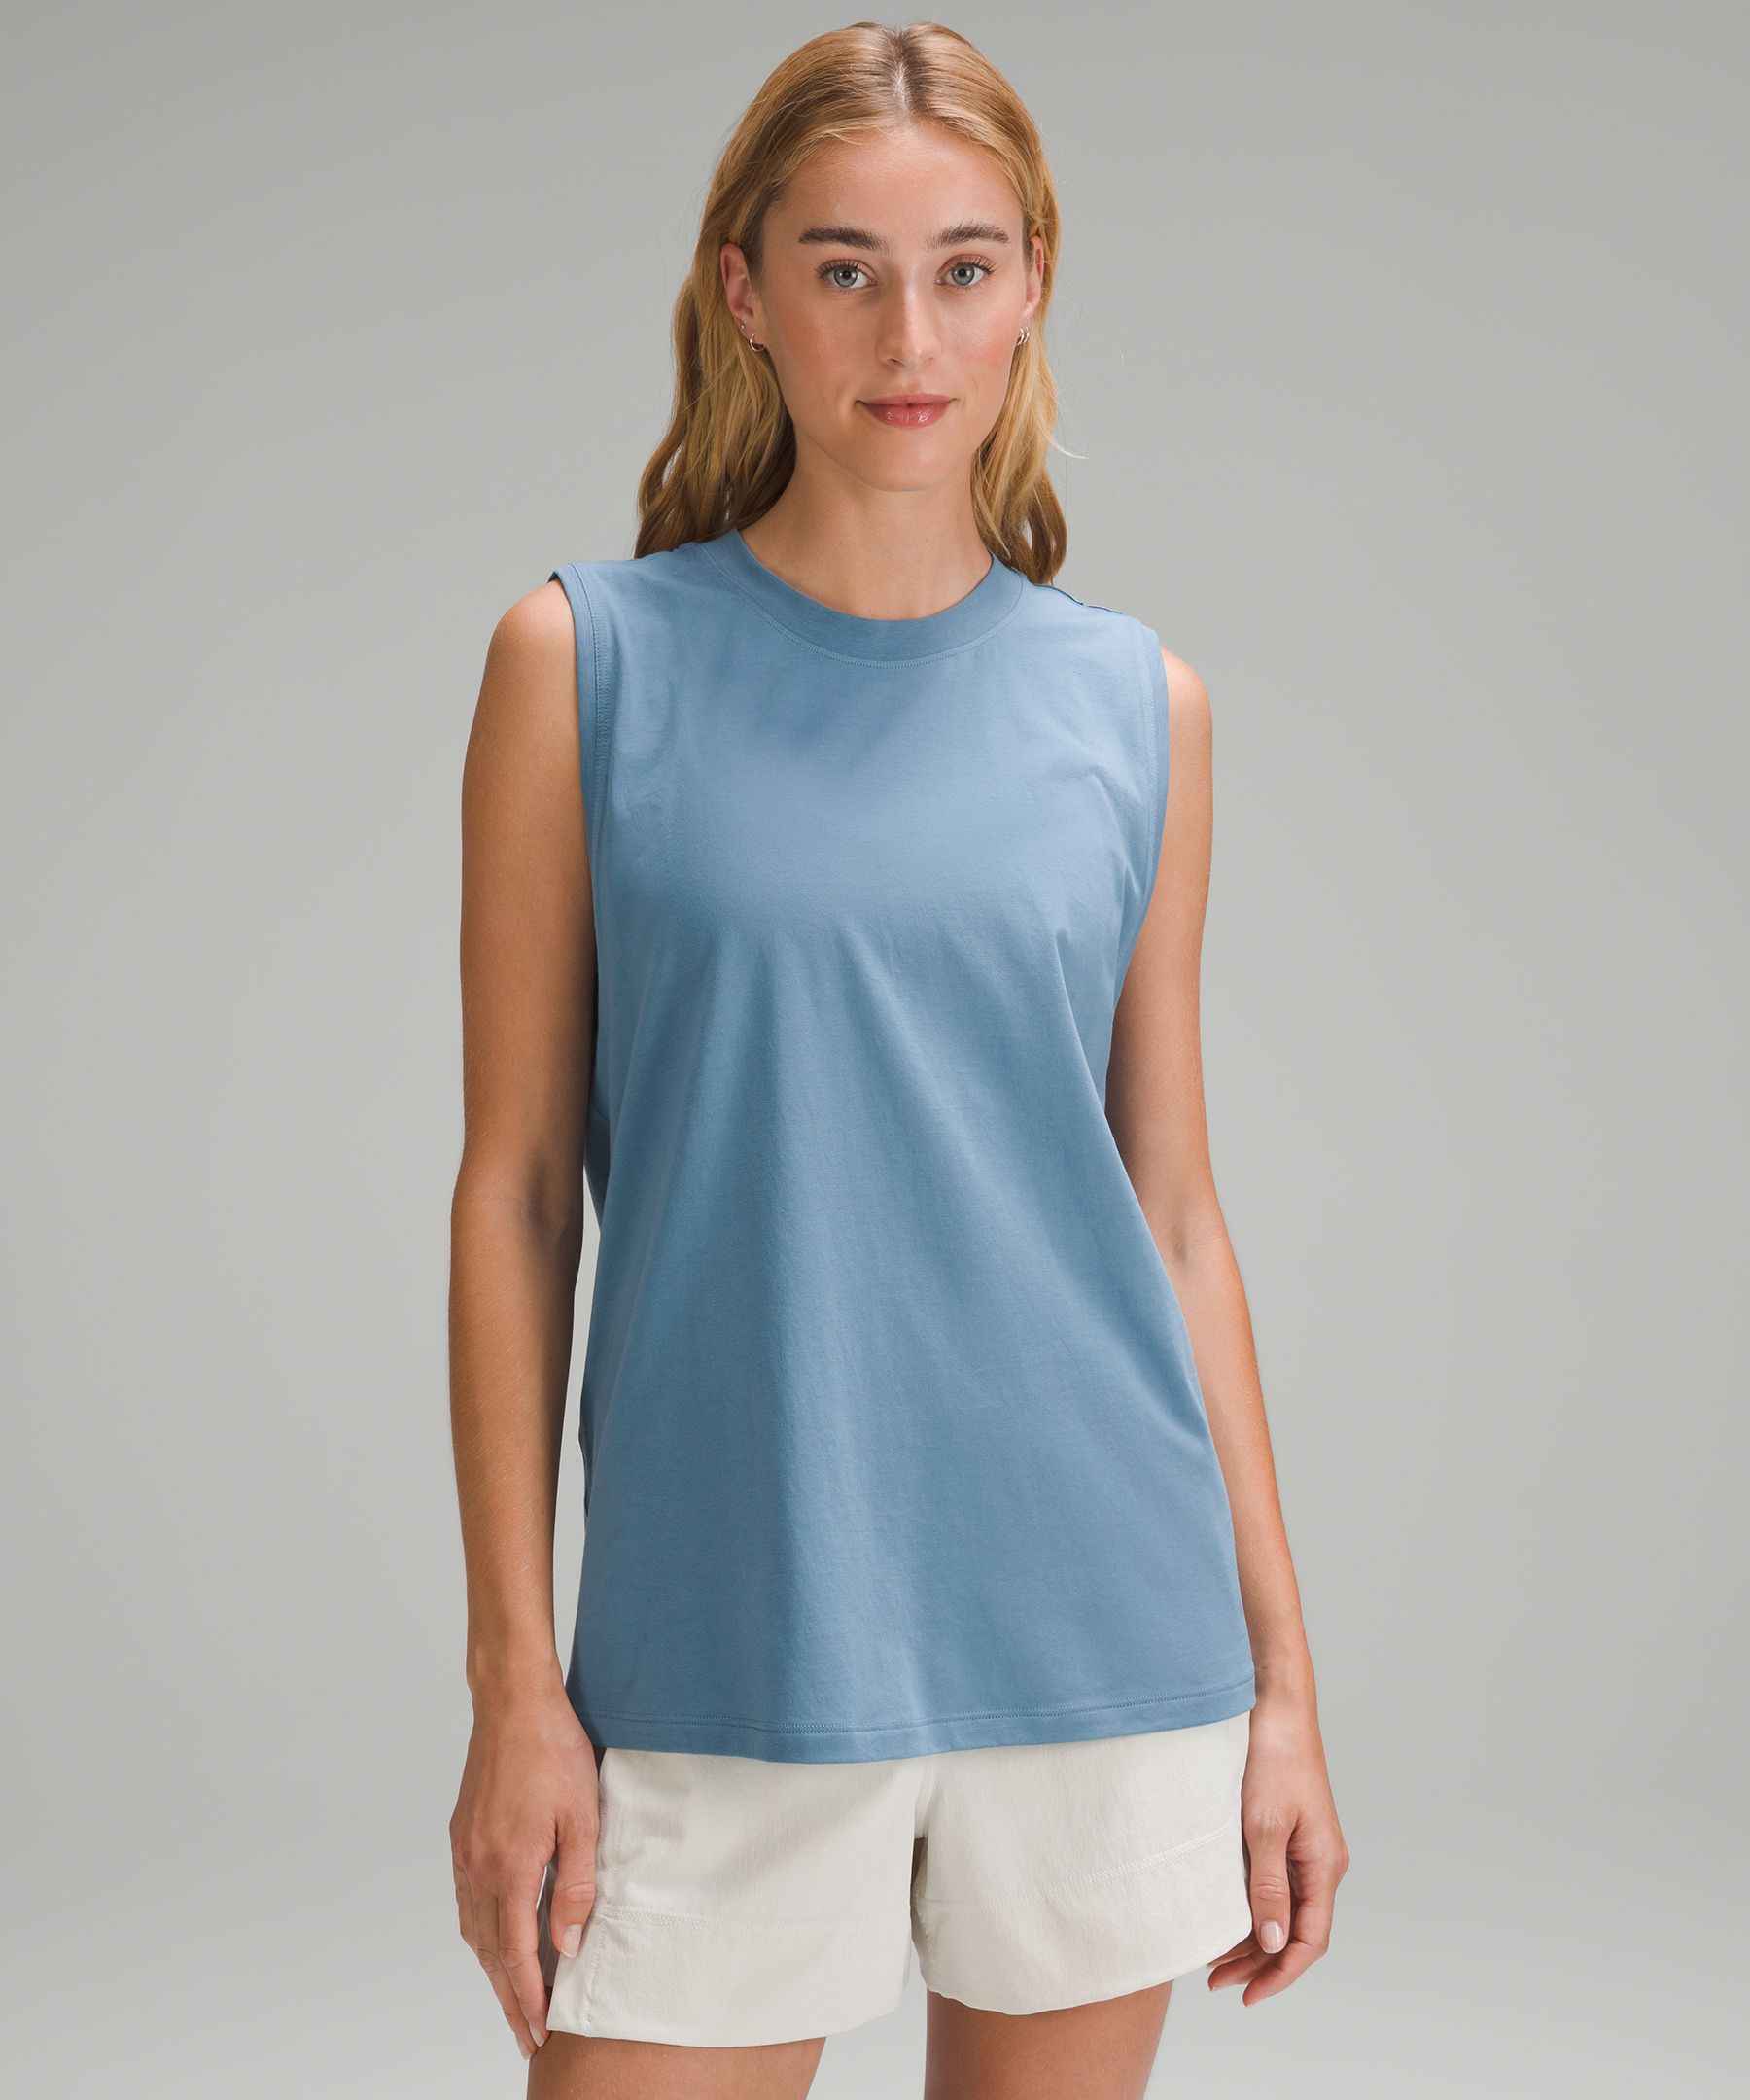 Lululemon All Yours Tank Top